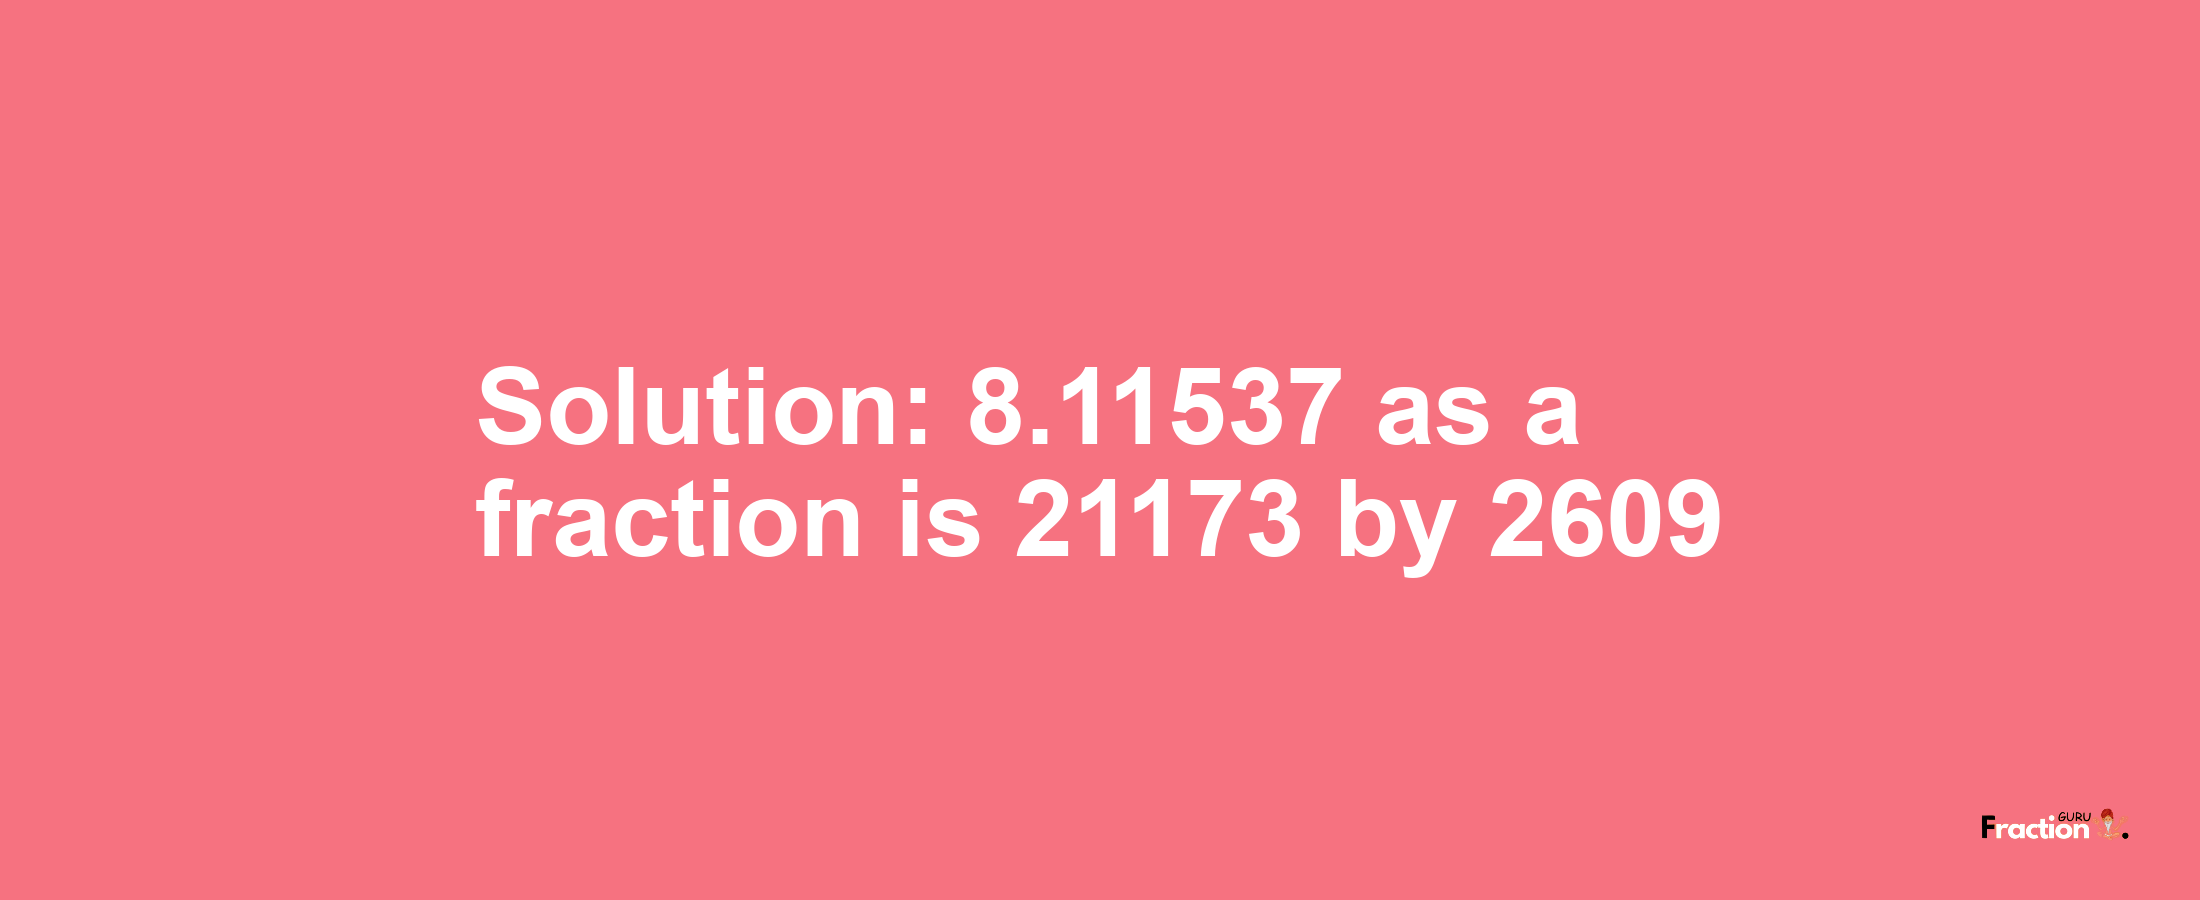 Solution:8.11537 as a fraction is 21173/2609